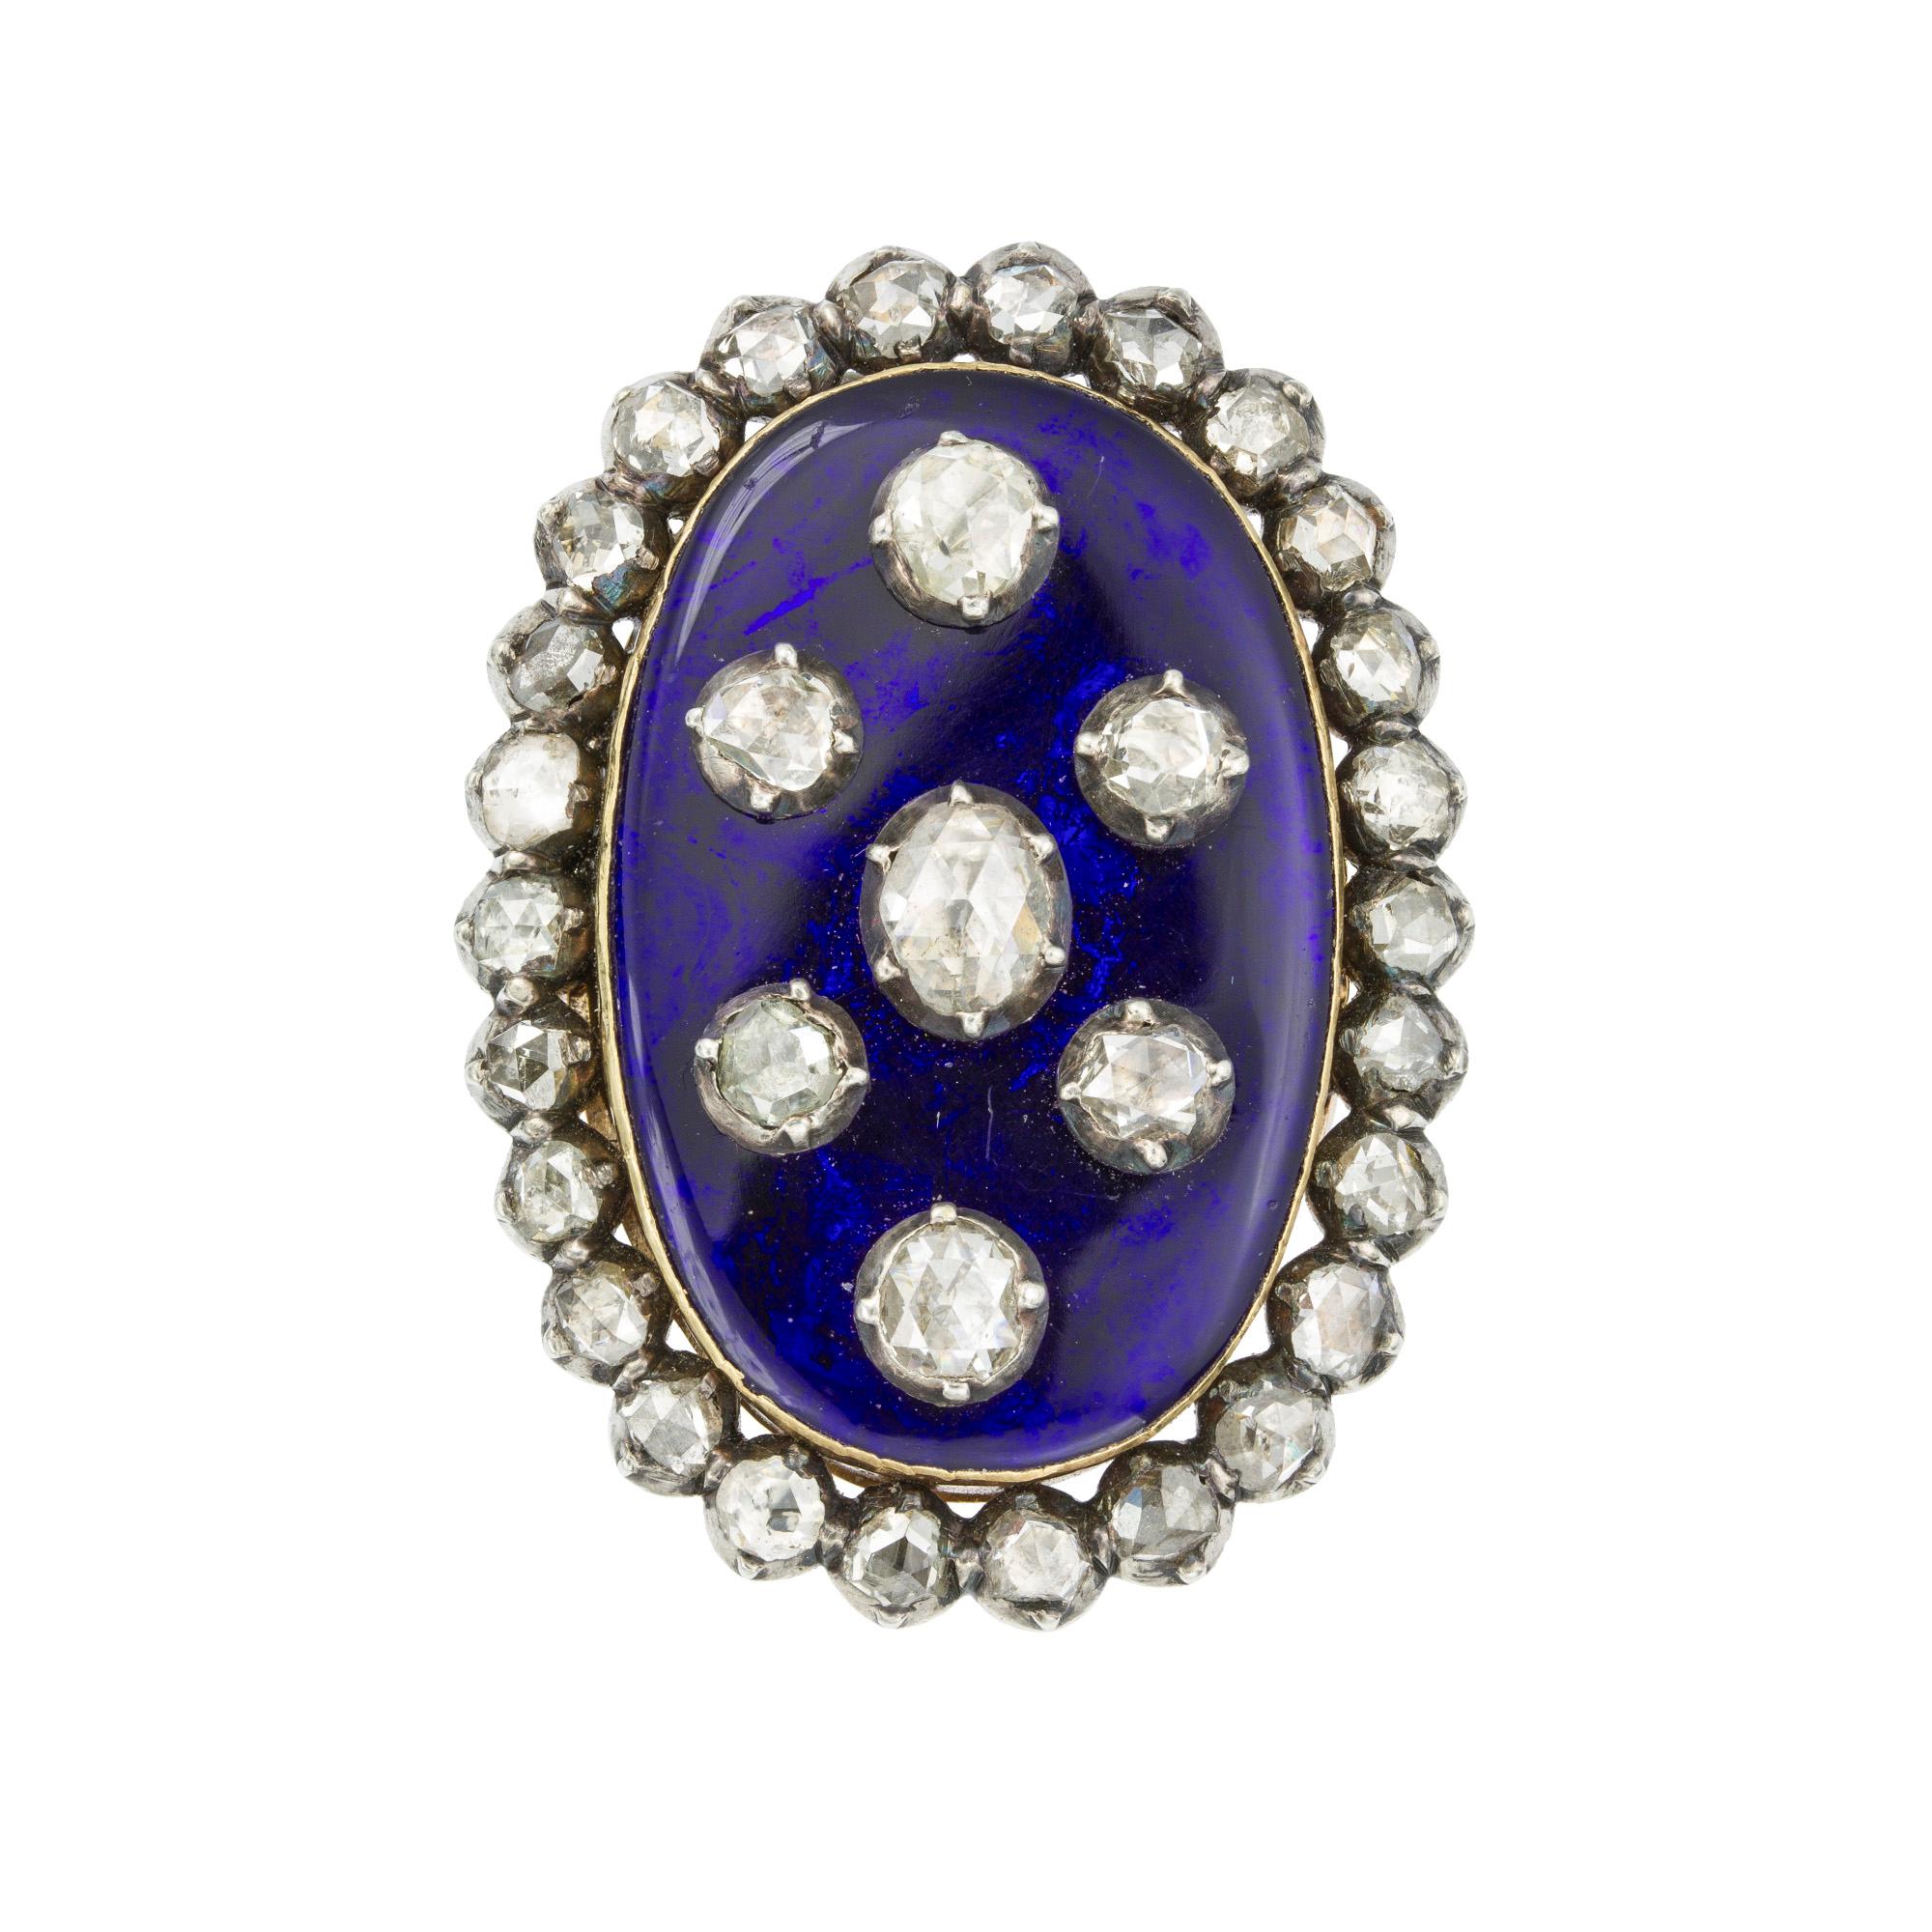 A Georgian Bague au Firmament blue enamel and diamond ring, the oval blue enamel set to the centre with an oval rose-cut diamond, surrounded by six round rose-cut diamonds  all diamonds cut-down silver collet-set on enamel, to a rose-cut diamond-set